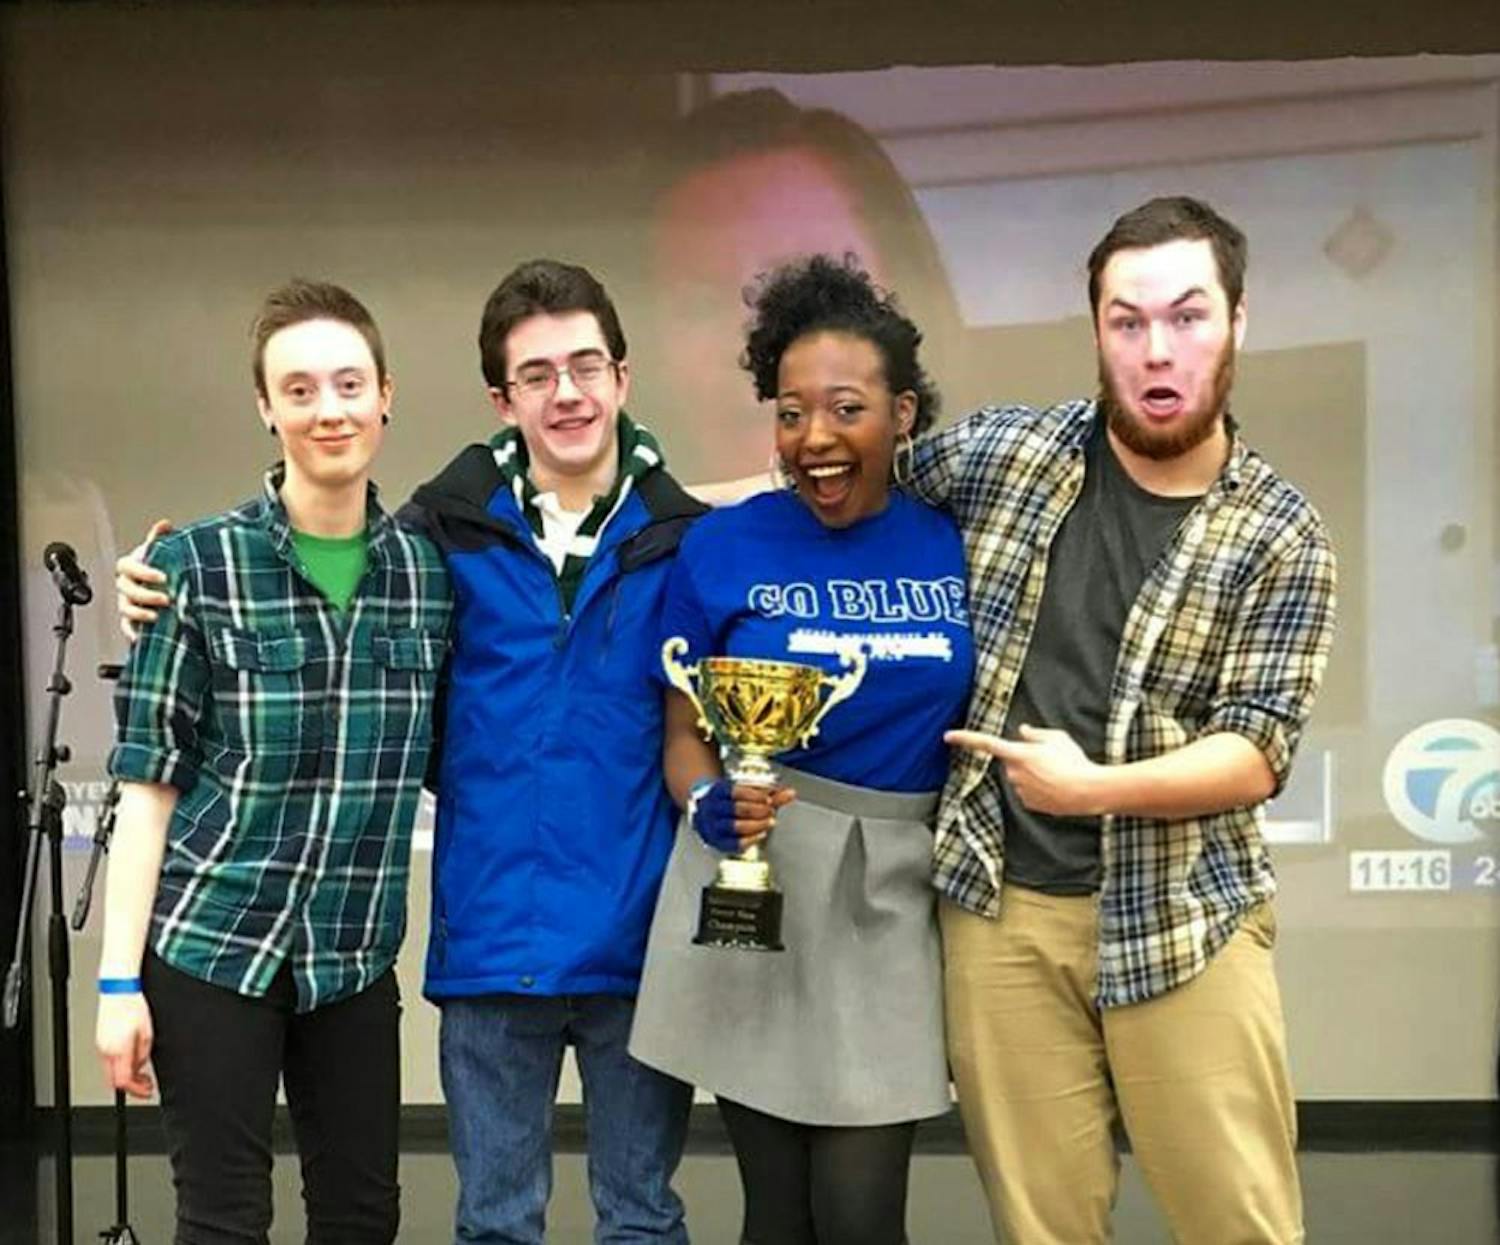 From left to right: Jeffrey Creed, Connor Mack, Danielle Johnson, Tom Dreitlein.&nbsp;UB speaks slam team members win first place at Buffalo State slam competition.